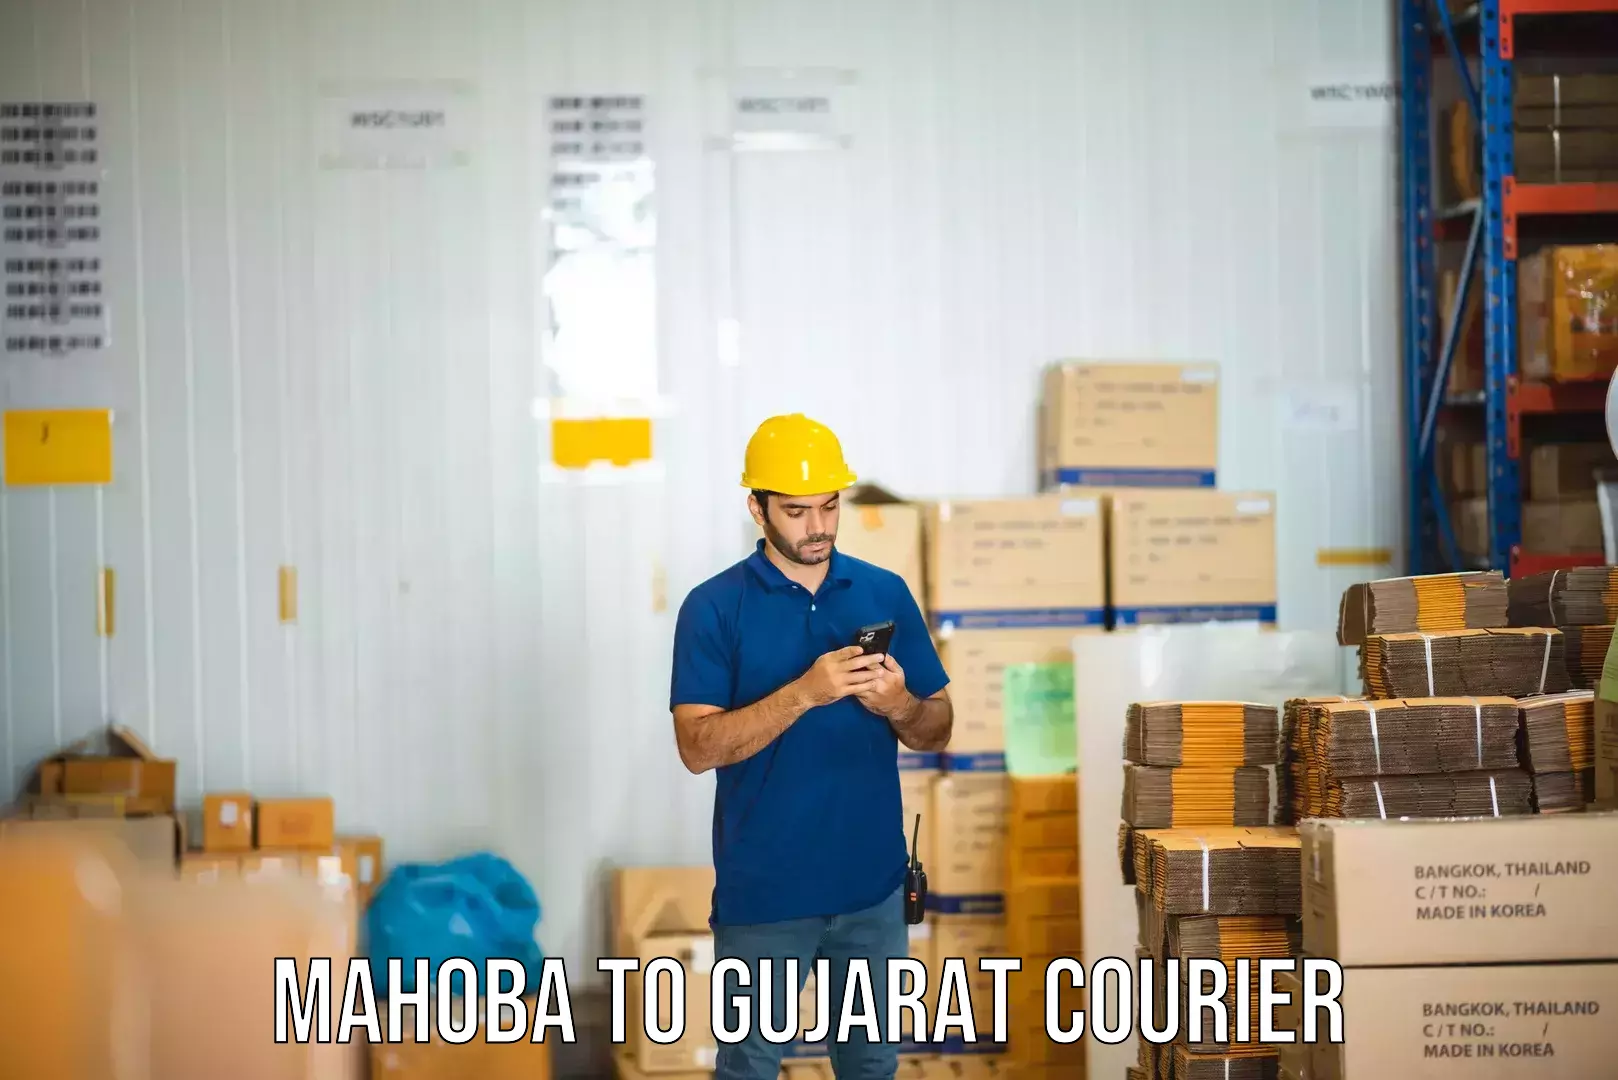 State-of-the-art courier technology Mahoba to Valsad